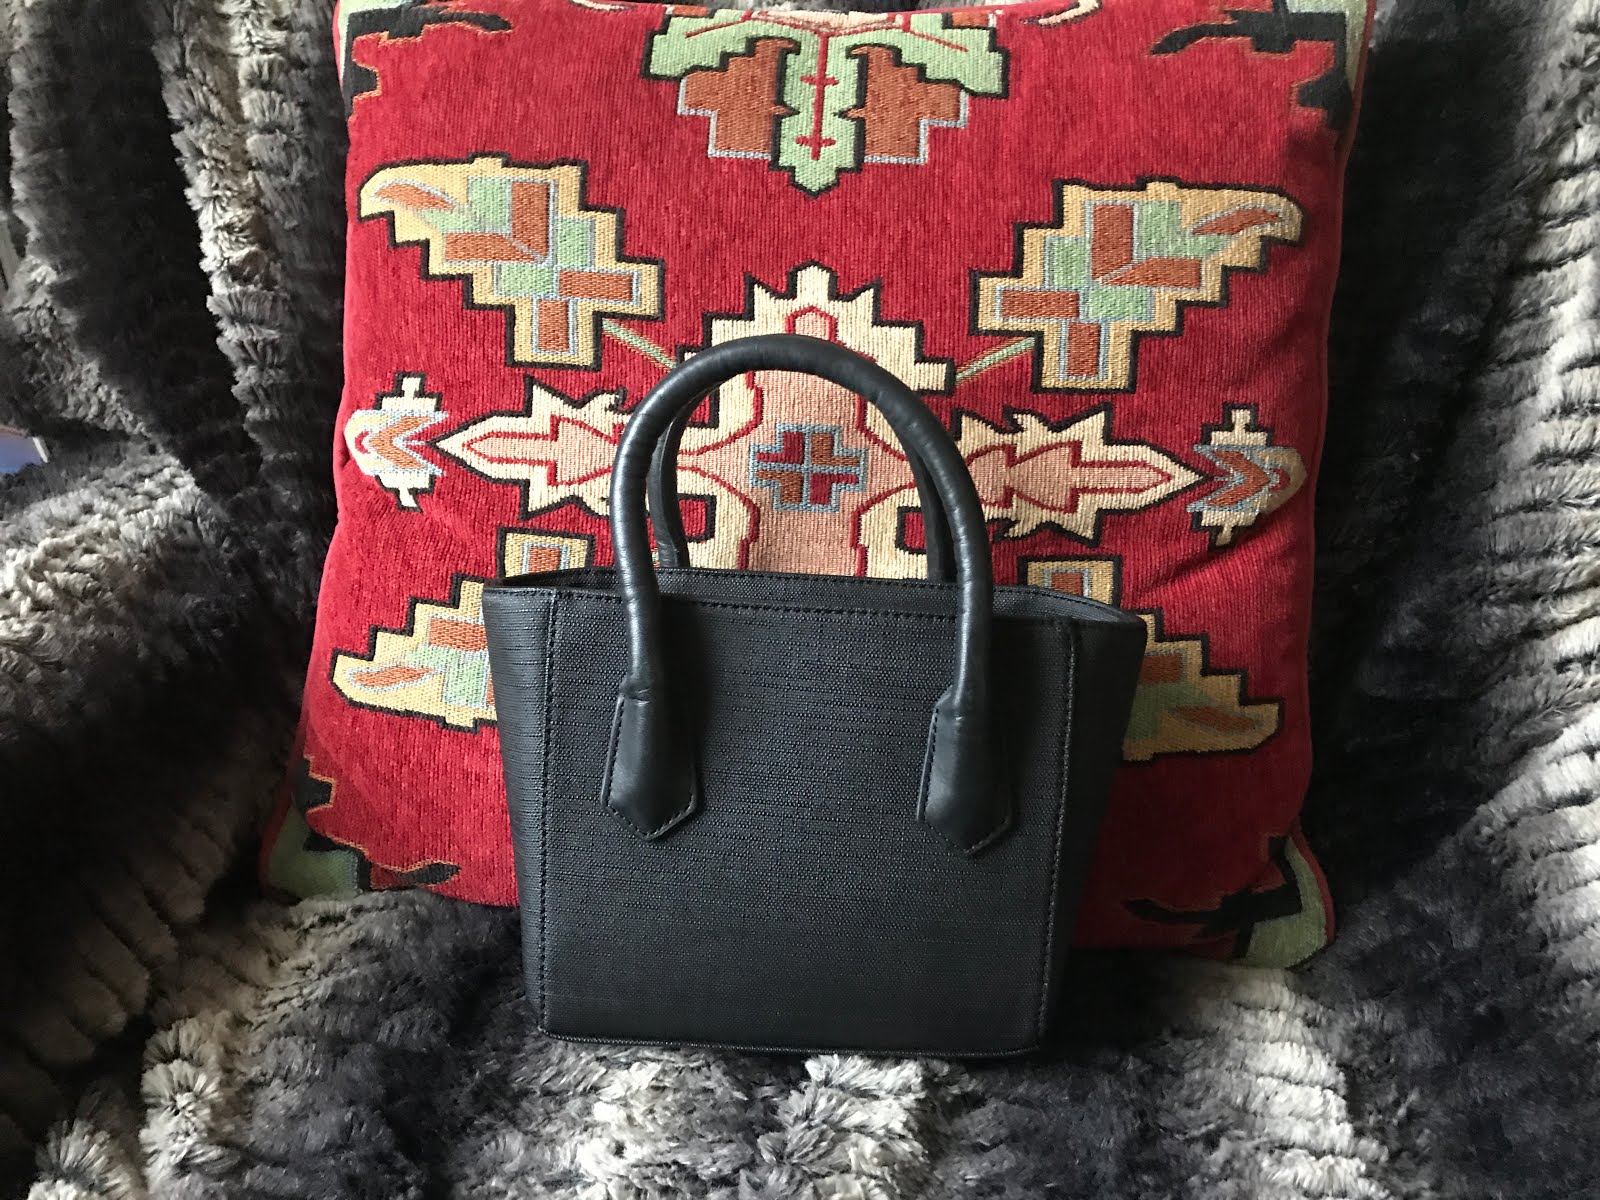 Dagne Dover Small Wade Diaper Bag Review & Comparison to other DD